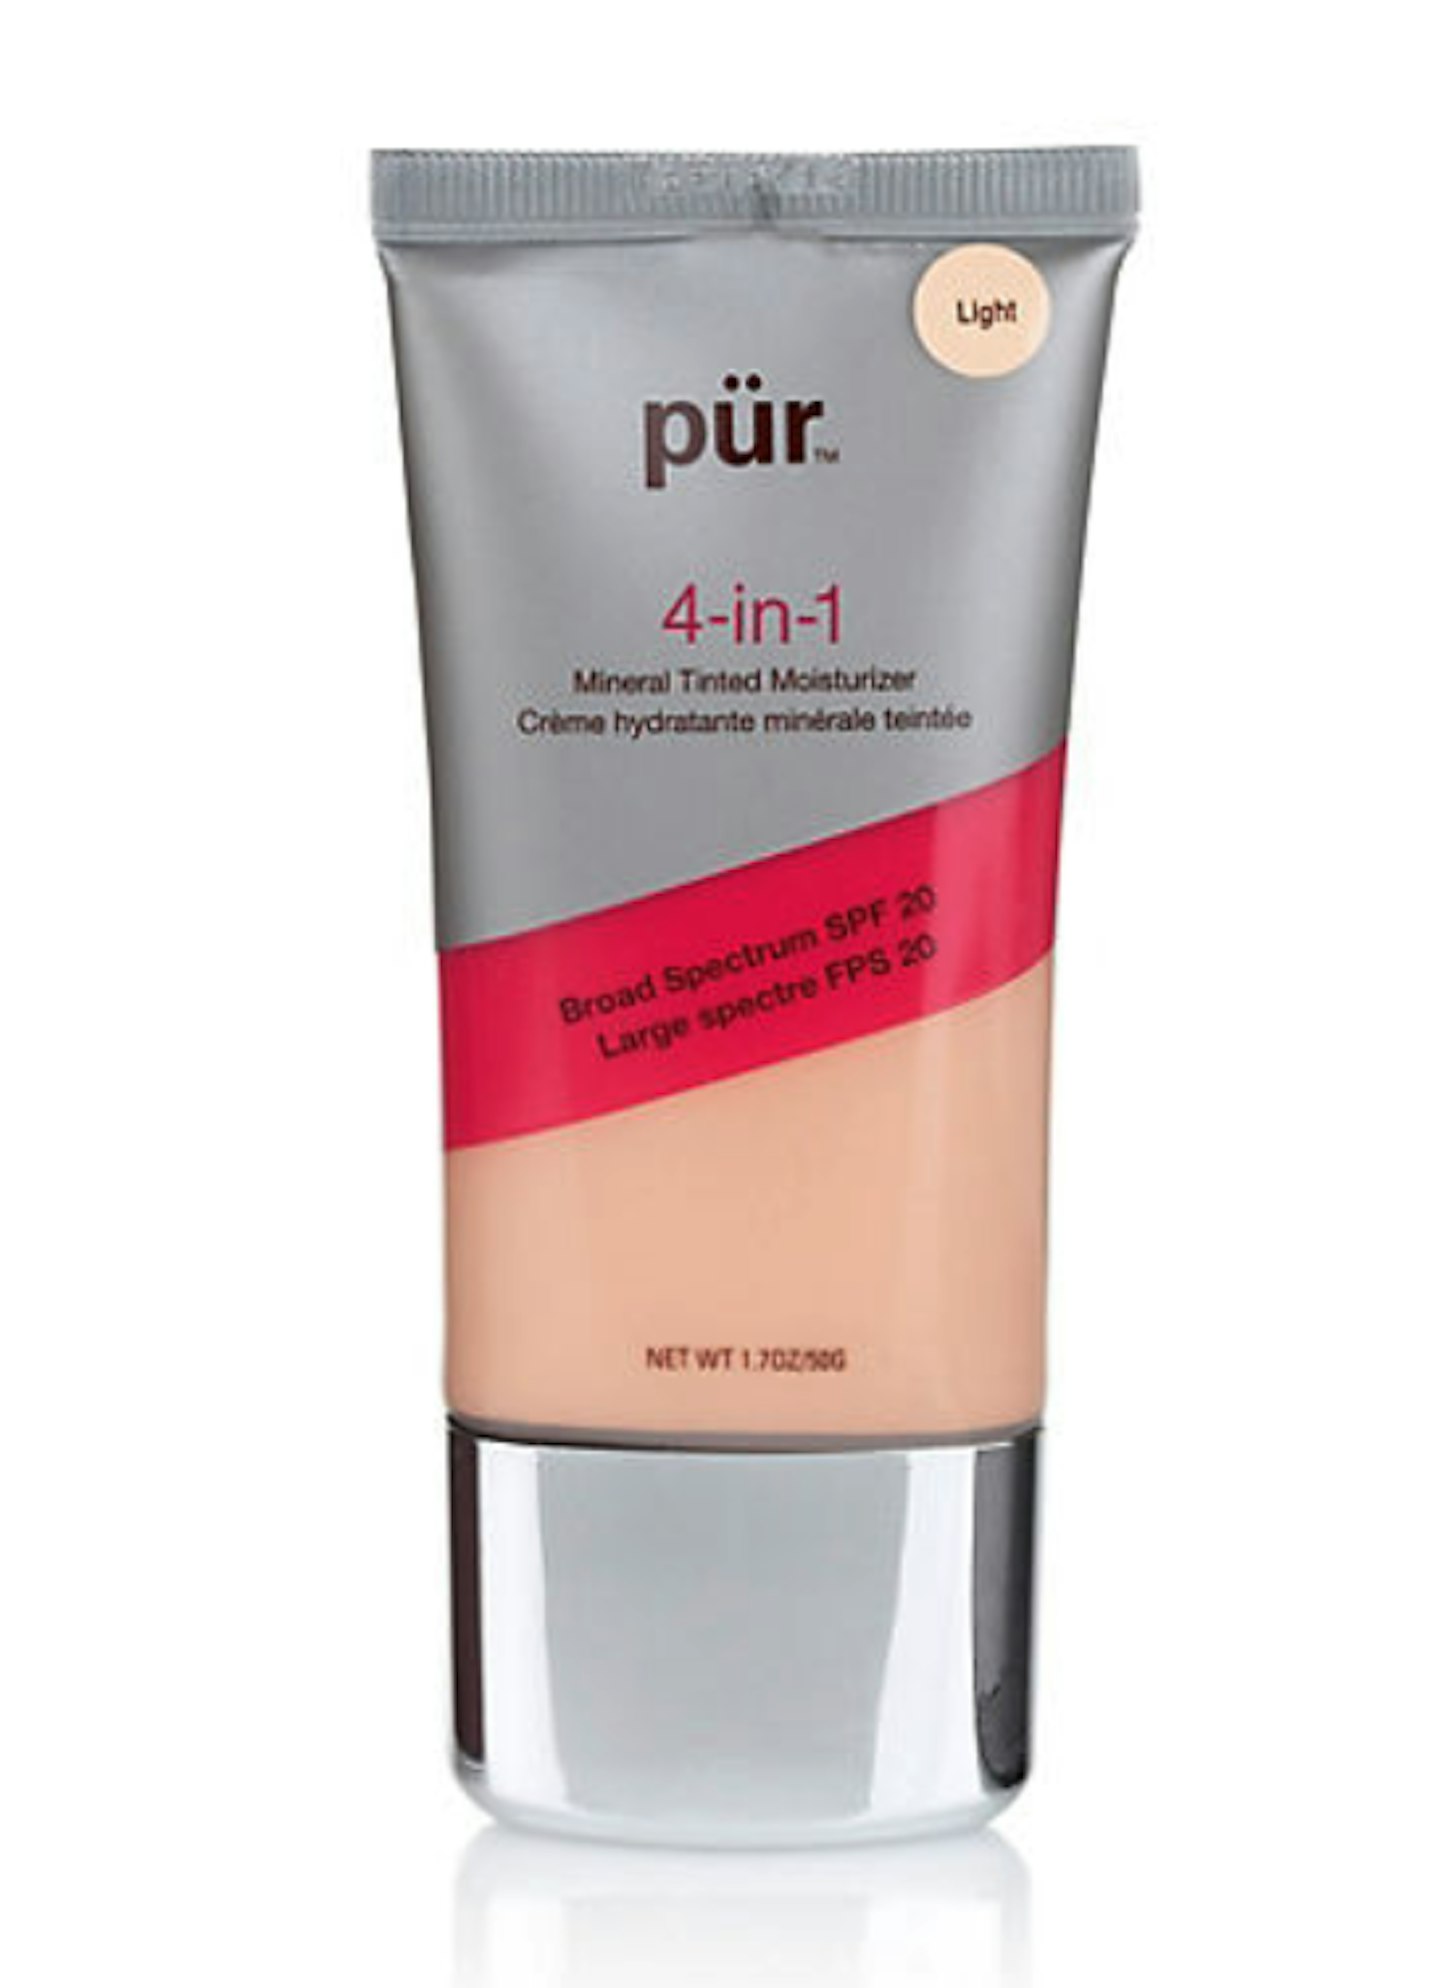 PUR Marks and Spencer 4-in-1 Mineral Tinted Moisturiser, u00a325